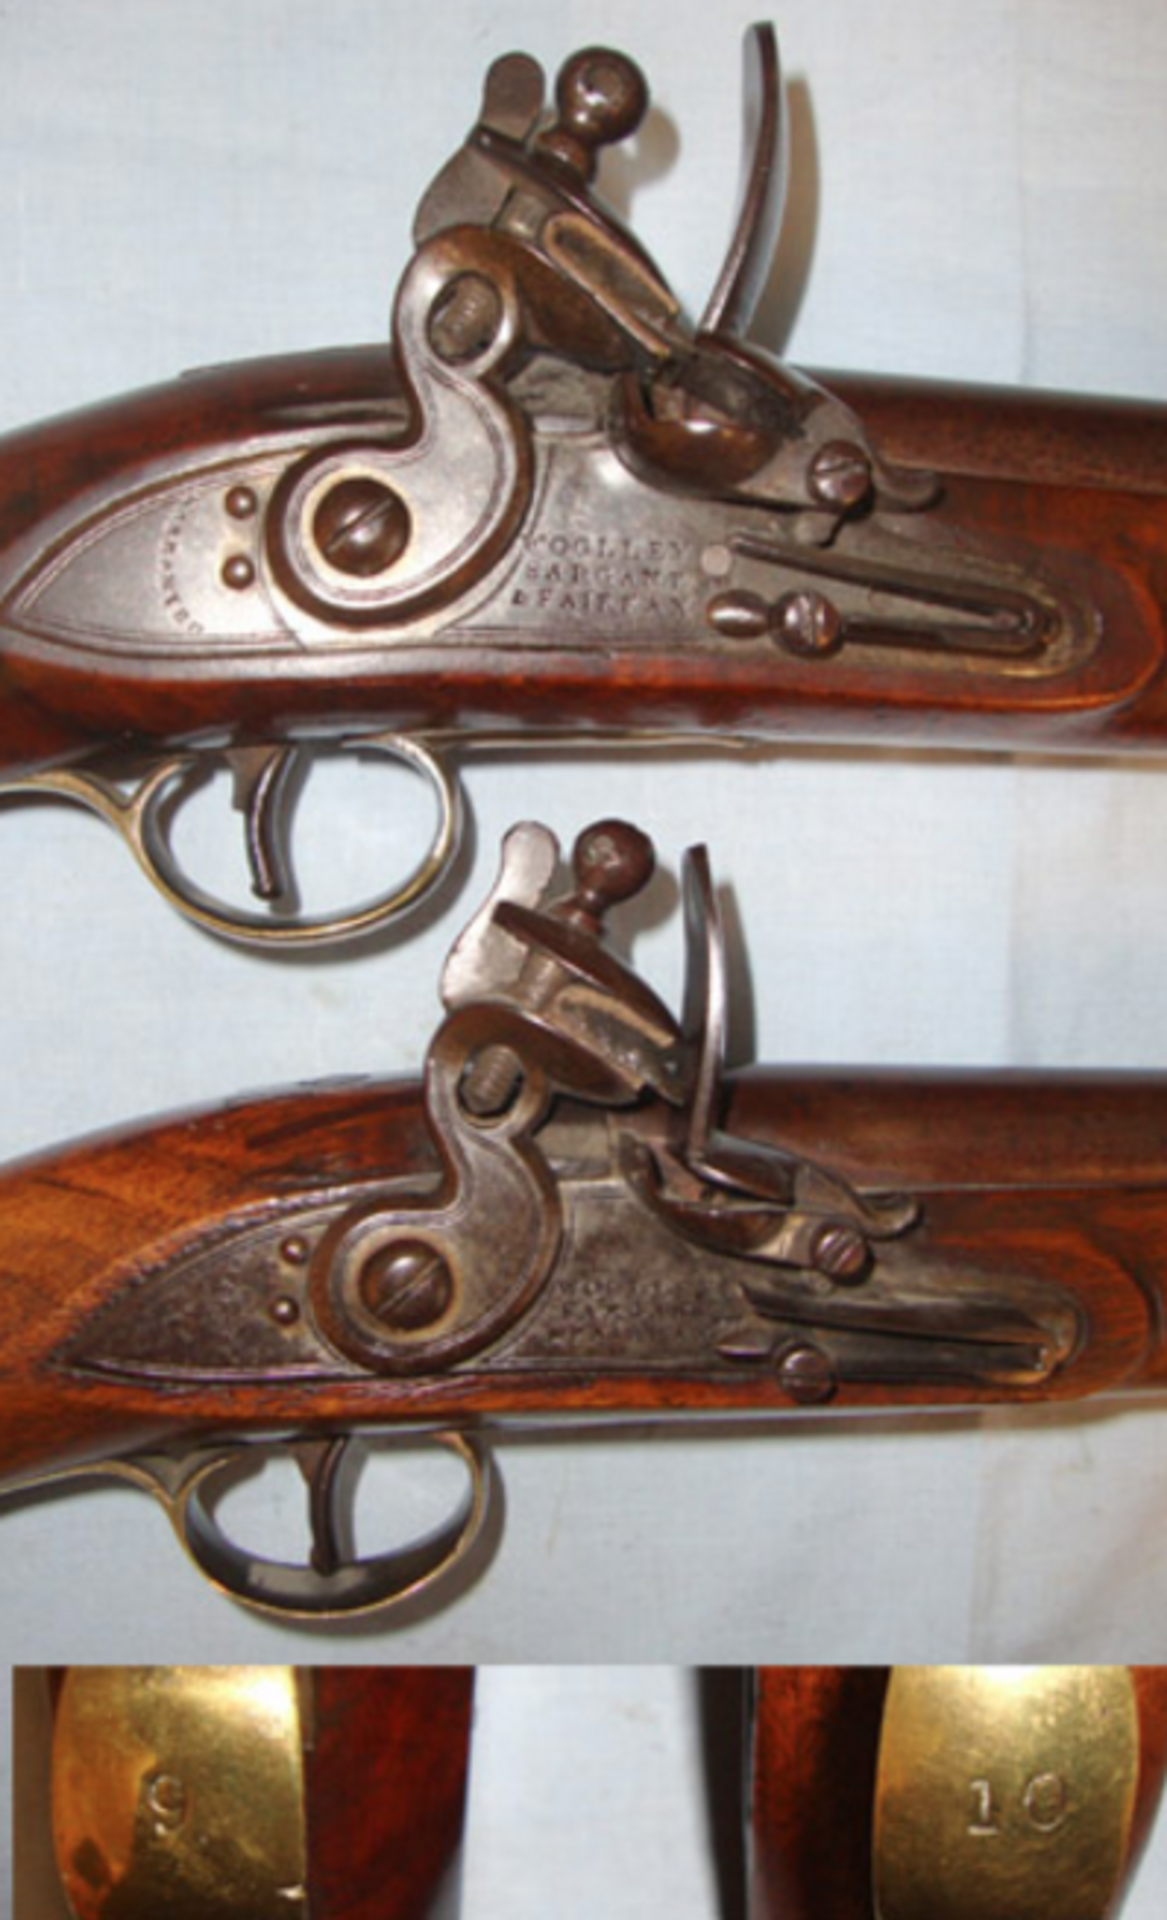 MINT, 1829- 1830 Matching Pair Of English Officer’s Private Purchase 1796 Pattern Pistols - Image 2 of 3